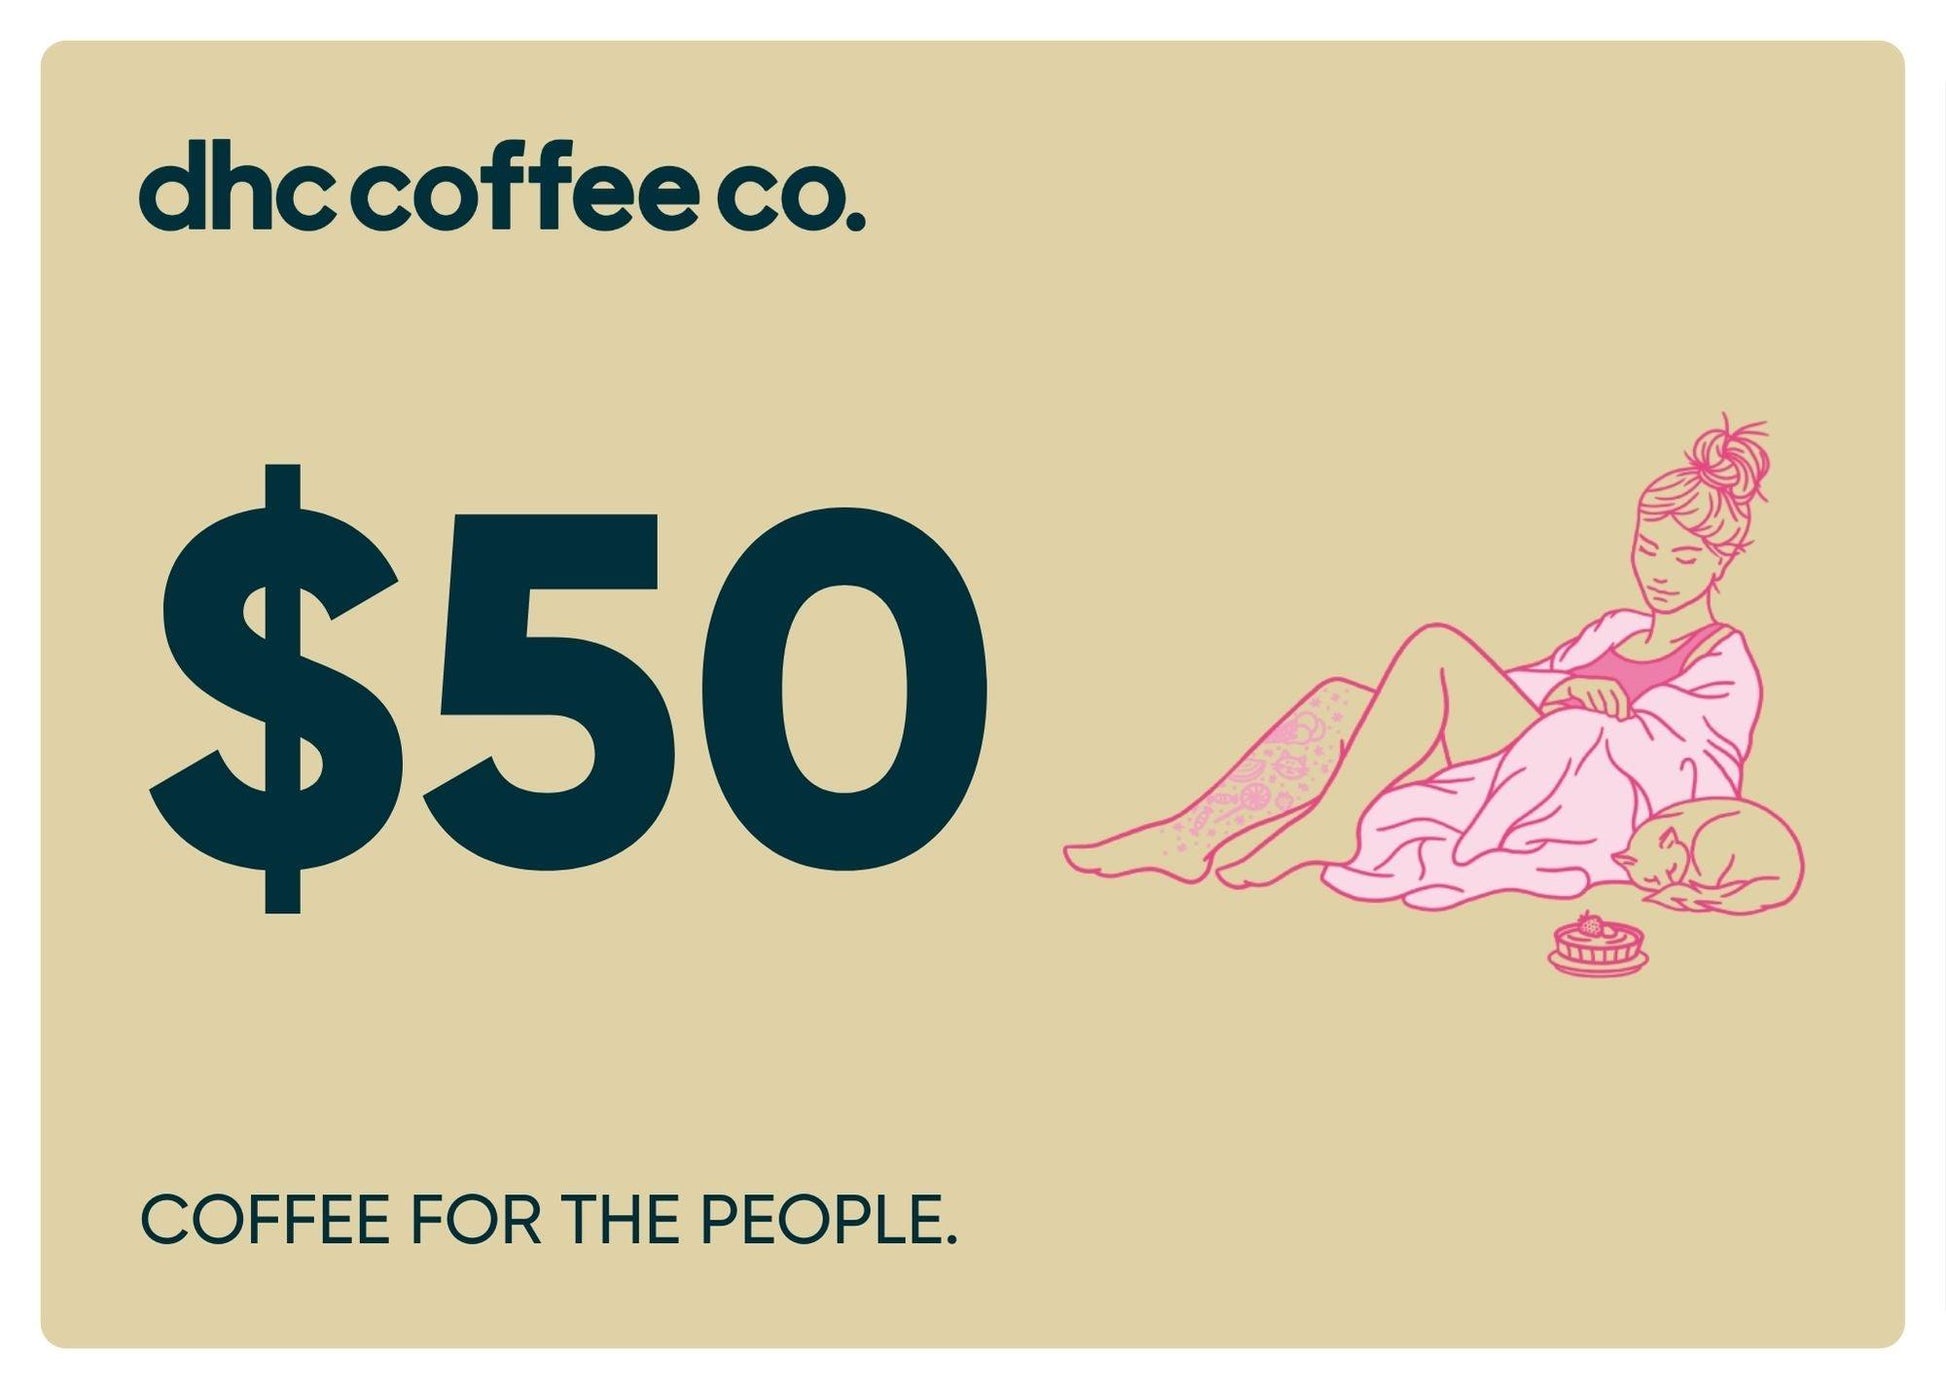 dhc coffee co. Gift Card - dhc coffee co.